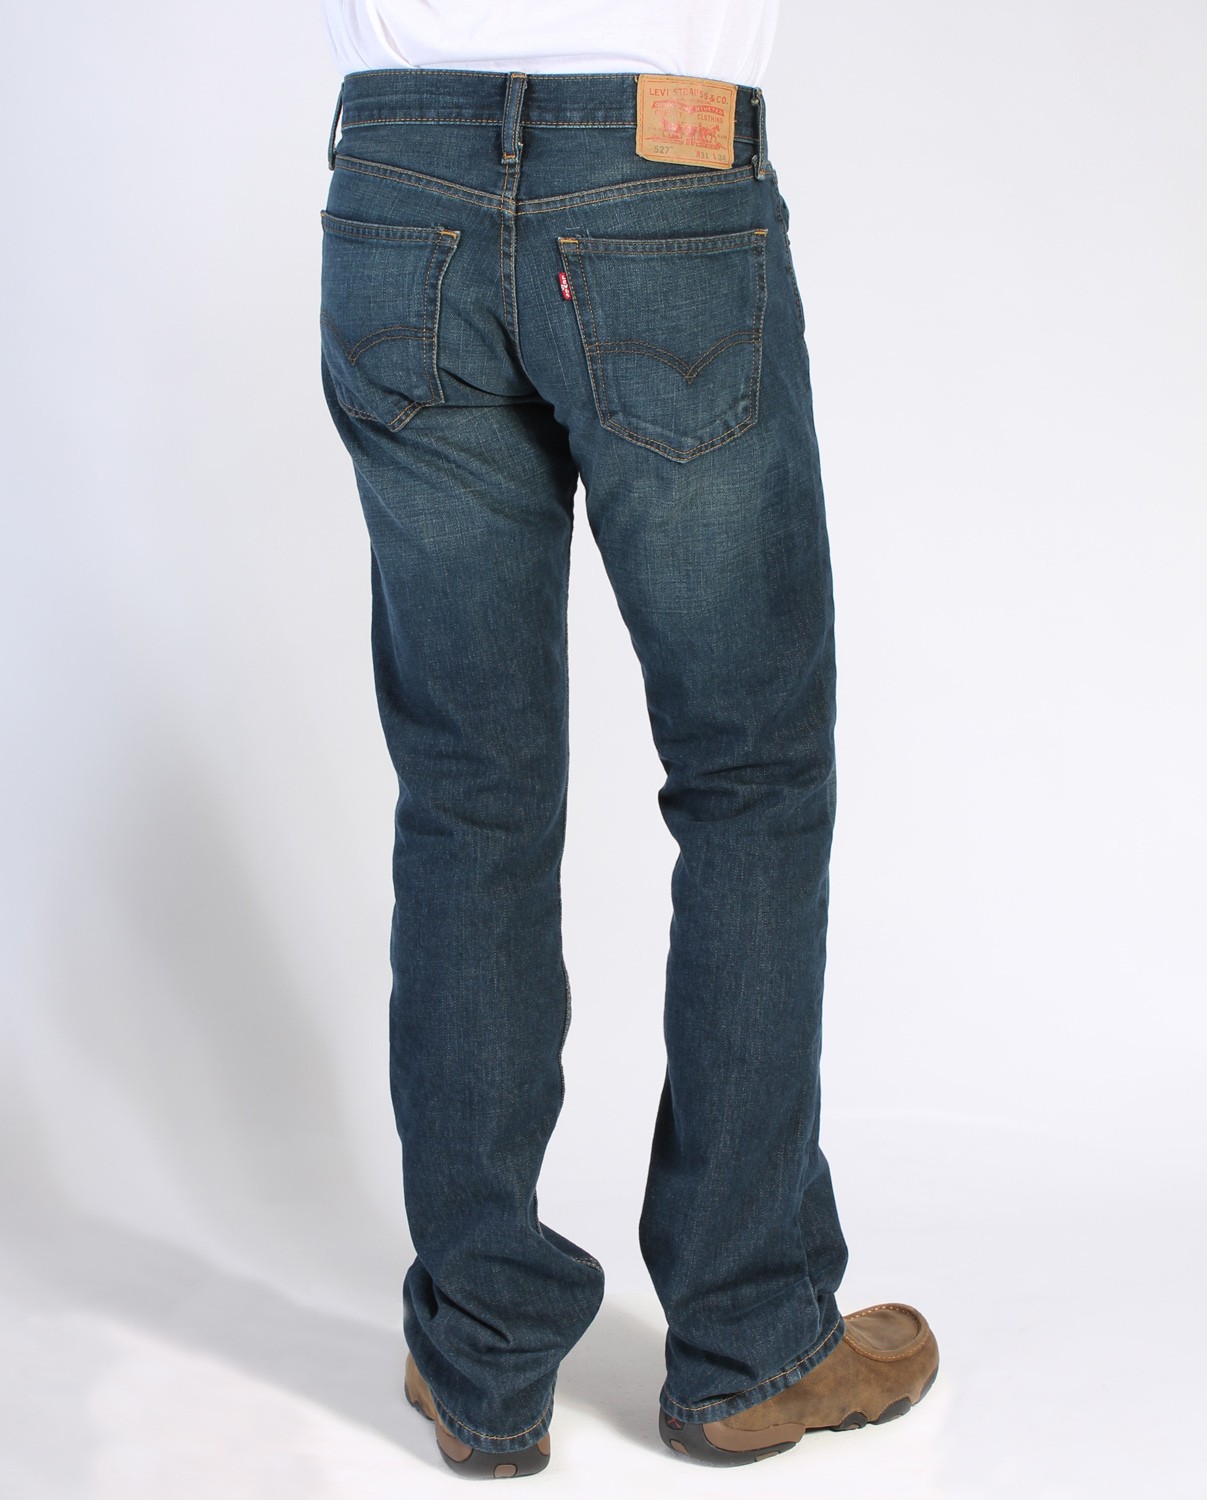 Buy > levis 527 boot cut jeans > in stock